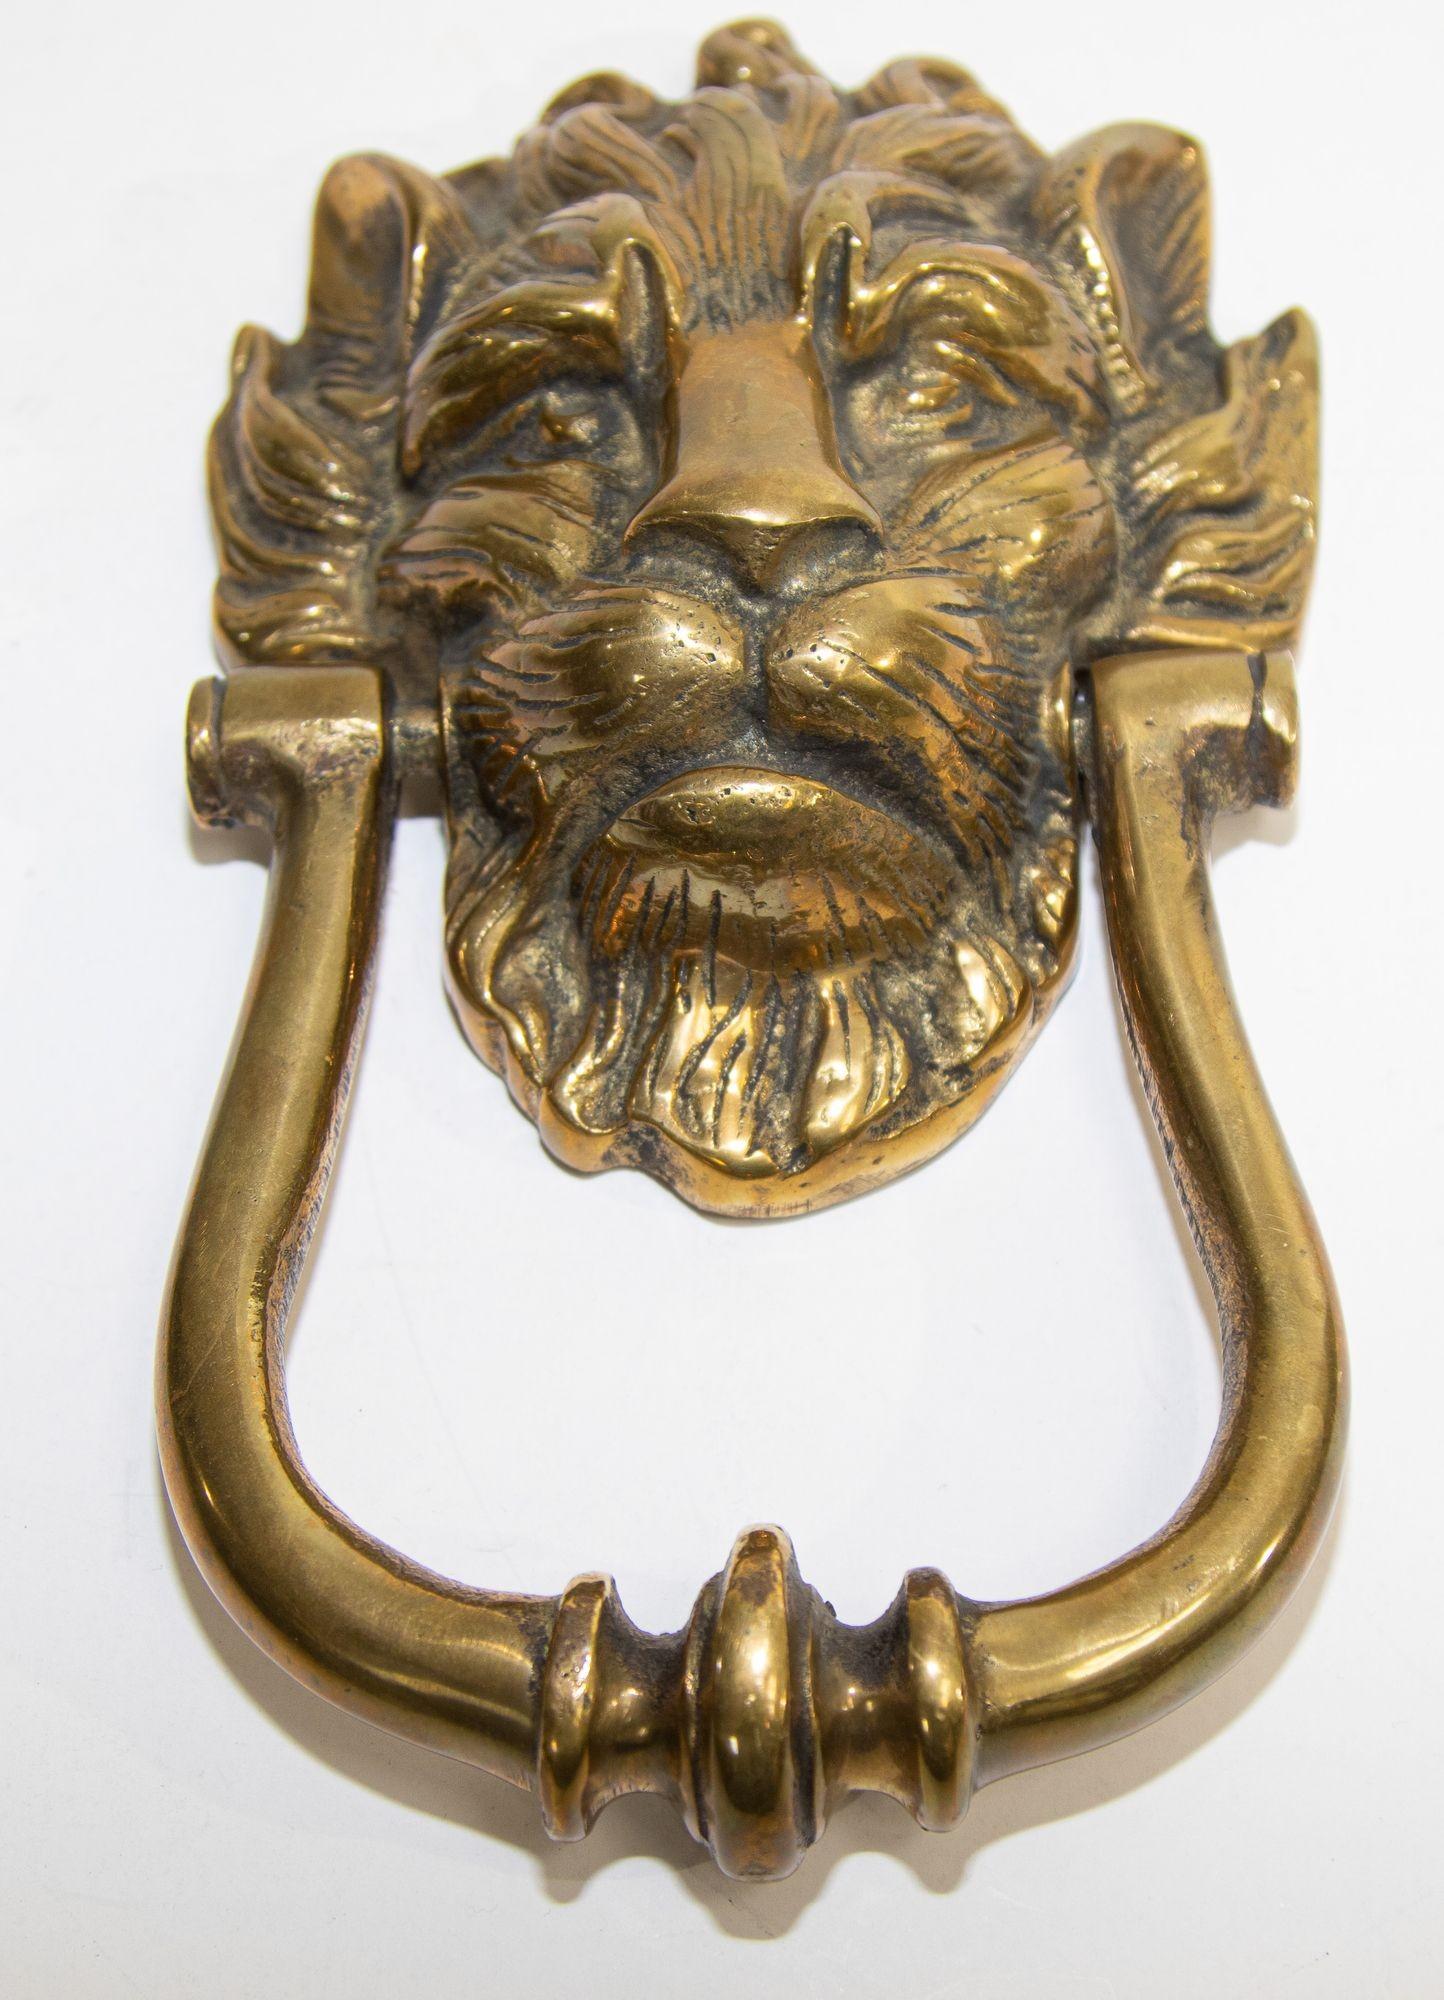 Vintage large solid cast bass Lion's Head door knocker.
Georgian English style large hand cast Lion's Head door knocker.
The lion's head form with attached knocker hand pull features gorgeous incised and raised relief design details, in a